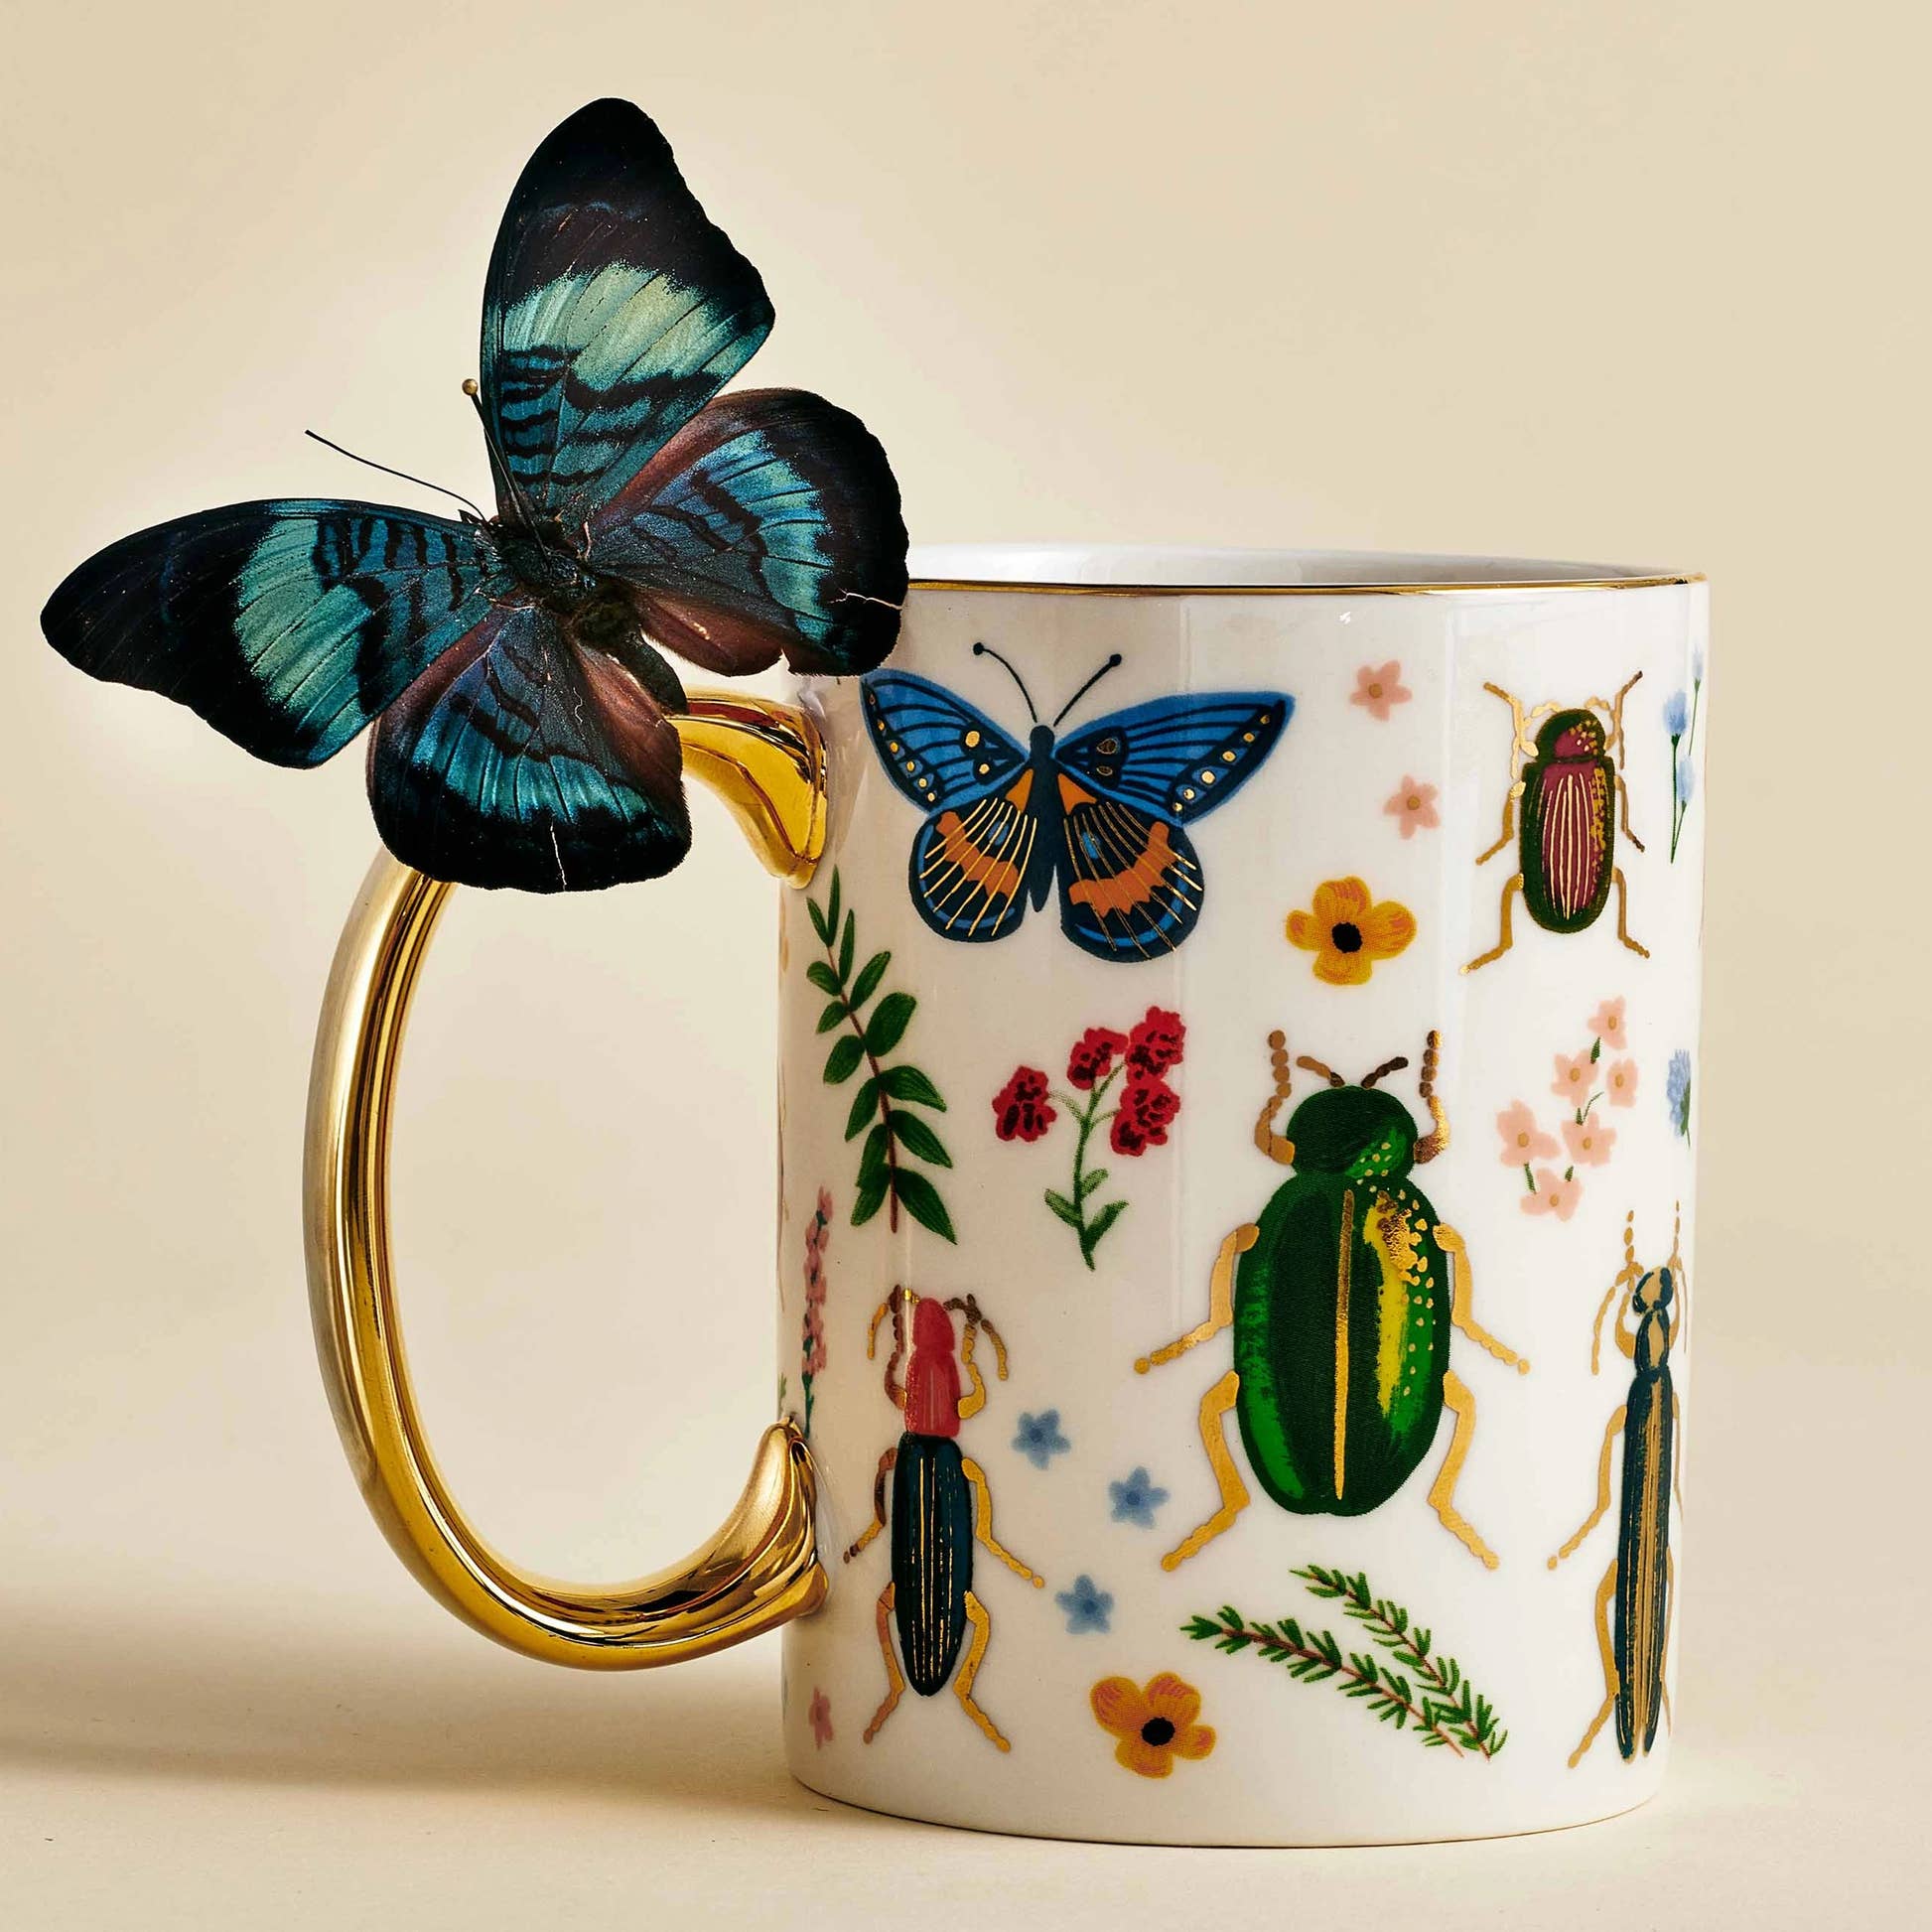 Rifle Paper Co Curio Porcelain Mug illustrated with flowers, insects, and gold accents. A blue butterfly is resting on the gold handle.